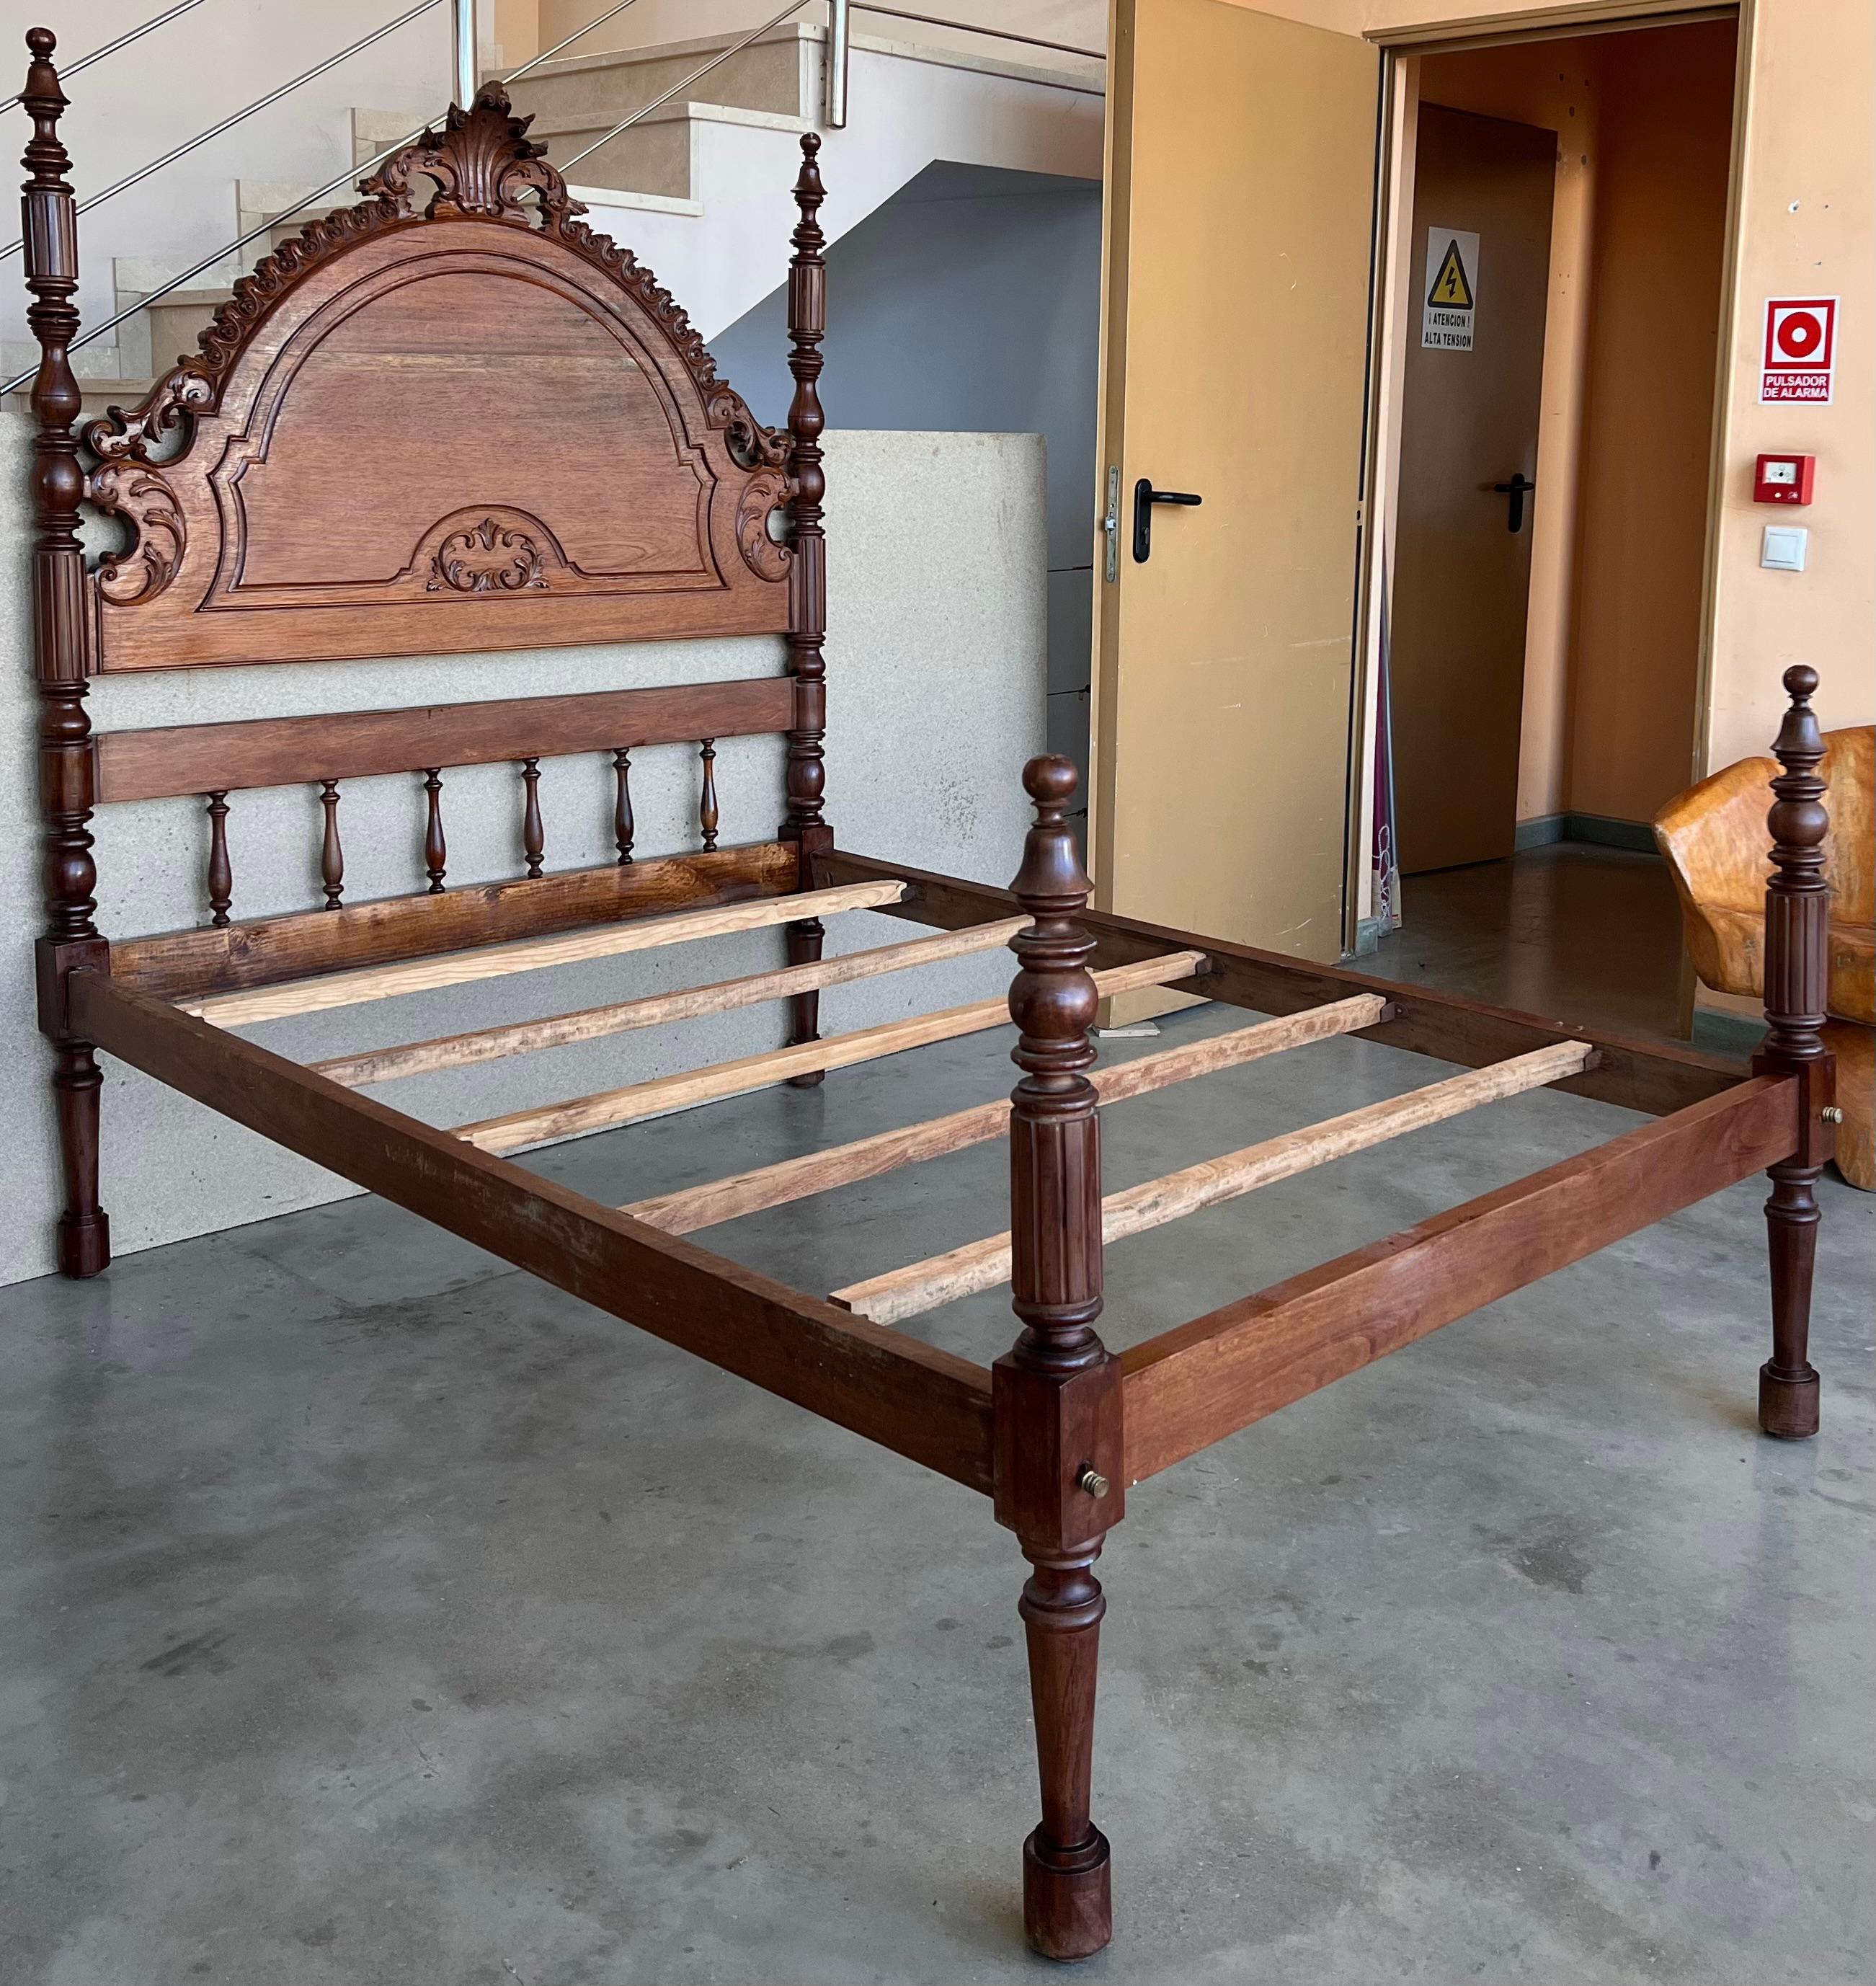 Baroque 20th Century Full Bed, Original Four Fluted Poster Spanish Bed with Wood Slabs For Sale